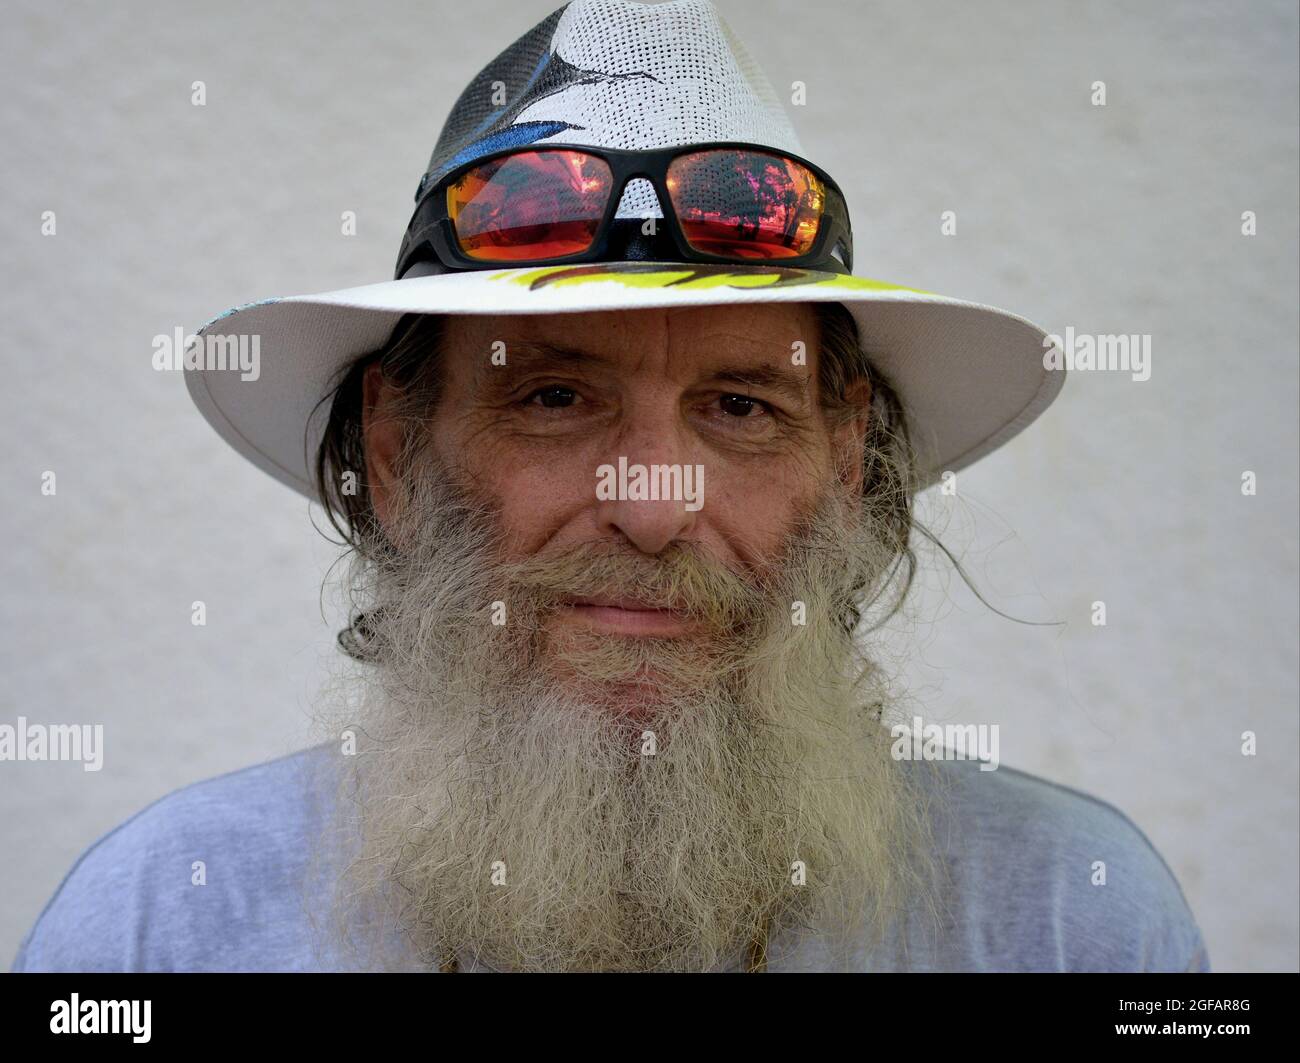 Bearded optimistic elderly Caucasian man grins and wears a painted Panama hat with colorful sunglasses on the brim of his hat, white background. Stock Photo